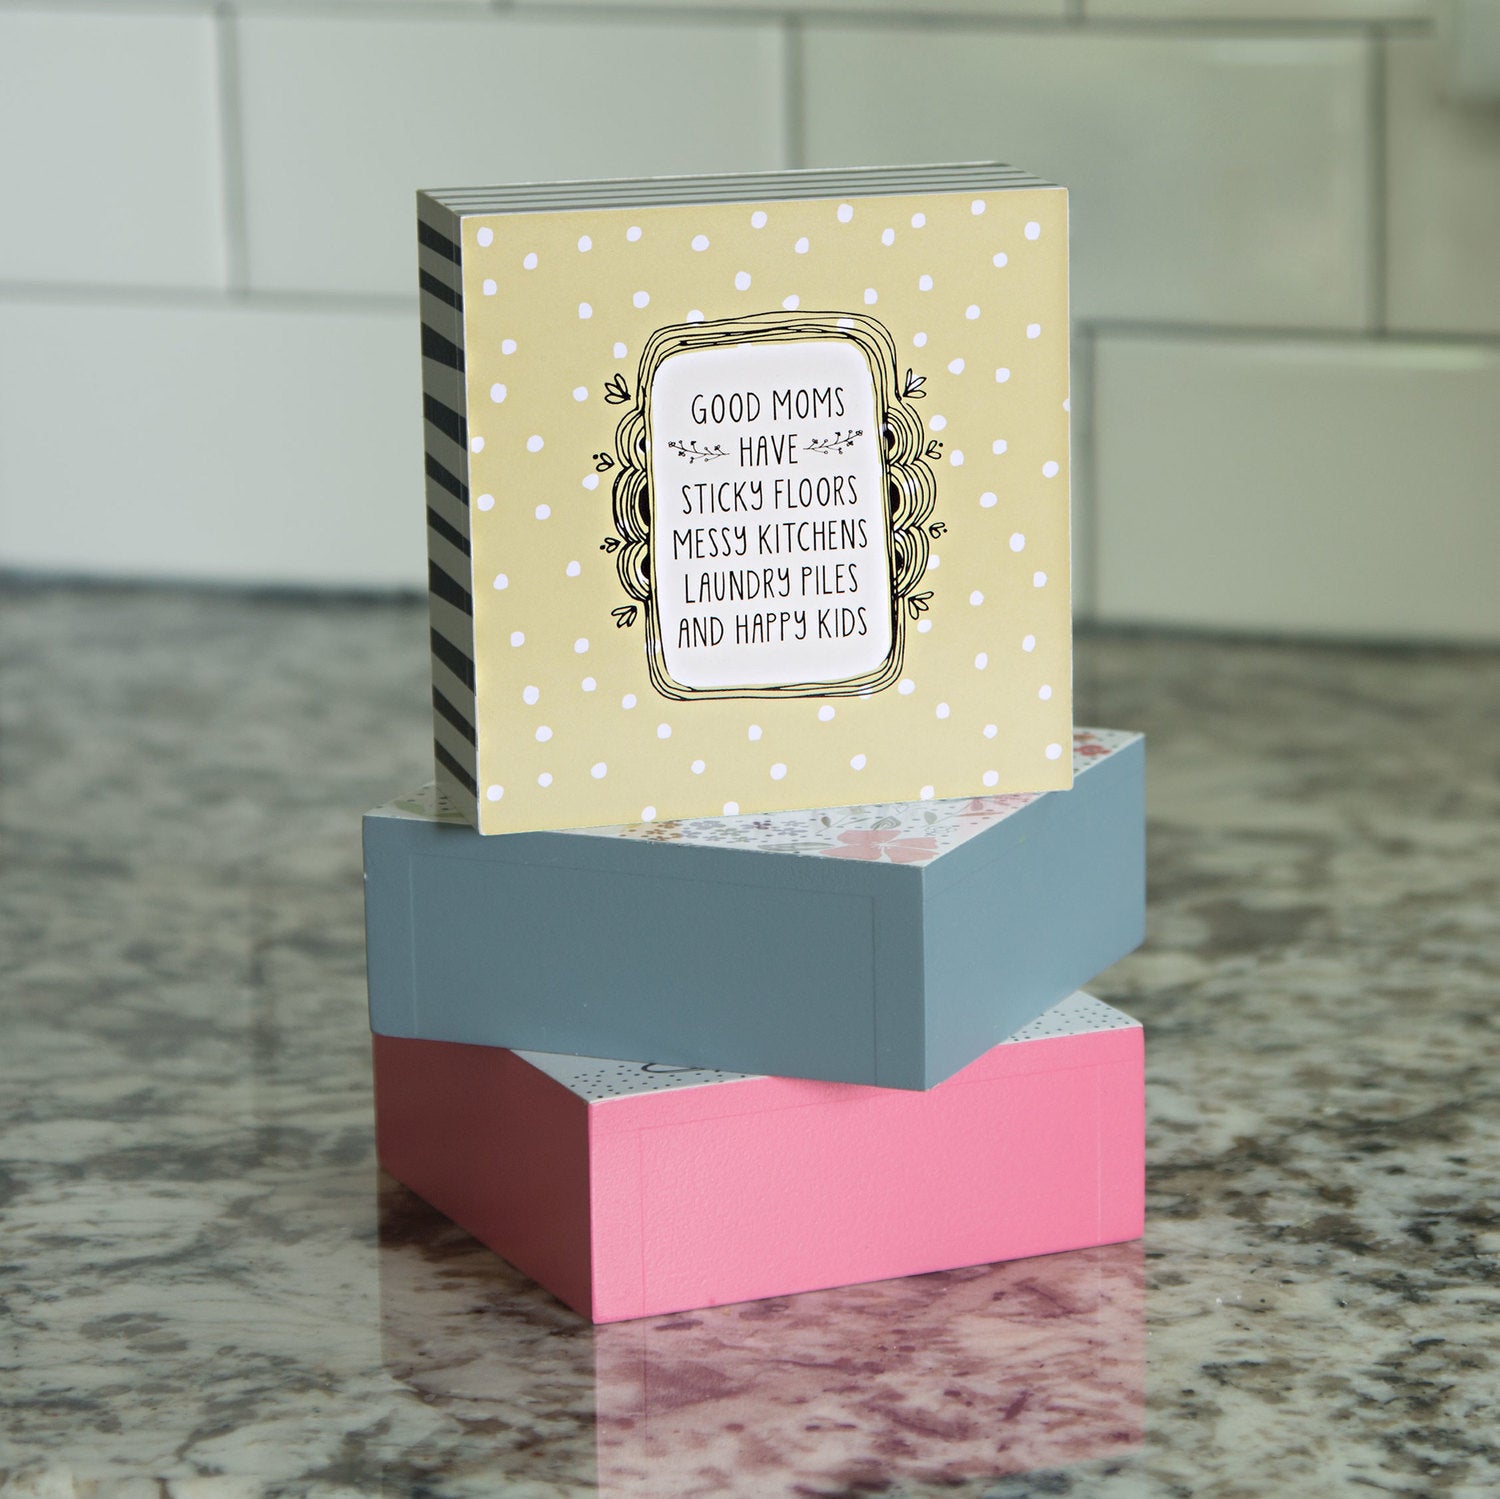 Good moms have sticky floors messy kitchens laundry piles Plaque Self-standing plaque - Beloved Gift Shop